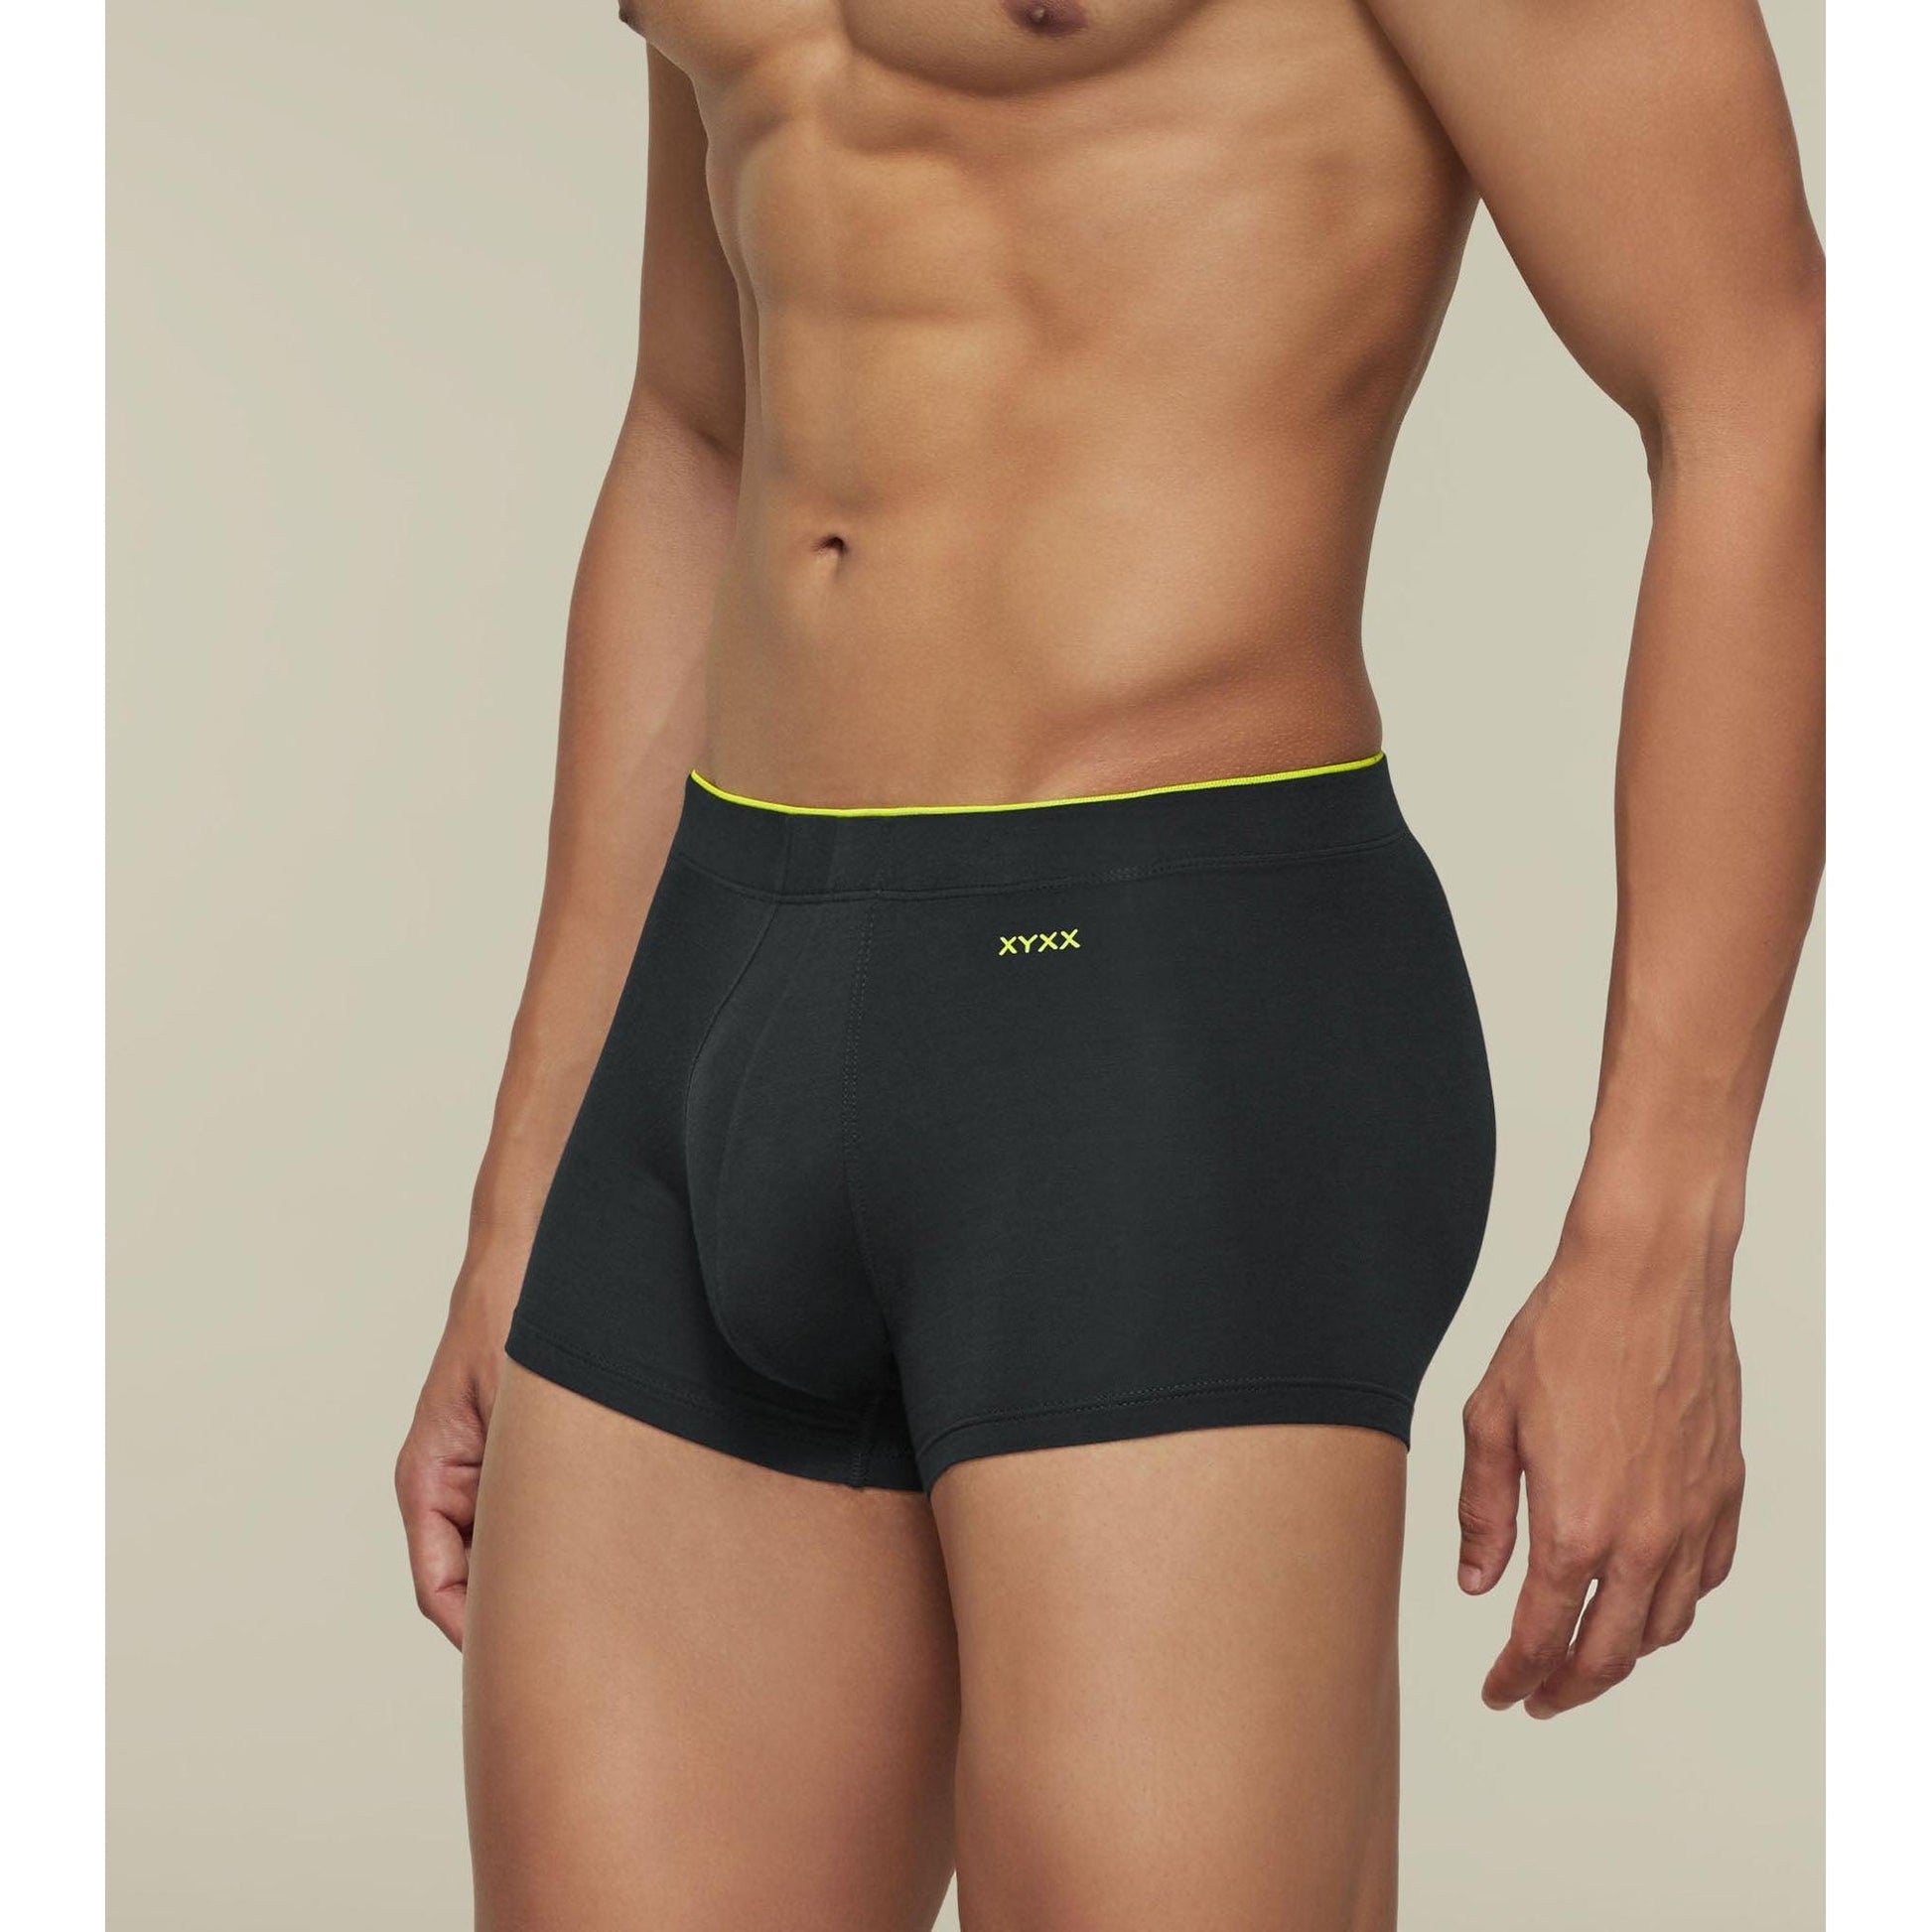 PACK OF 2 TENCEL™ TRUNKS- : UNO COLLECTION GRAPHITE GREY / BLACK KNIGHT